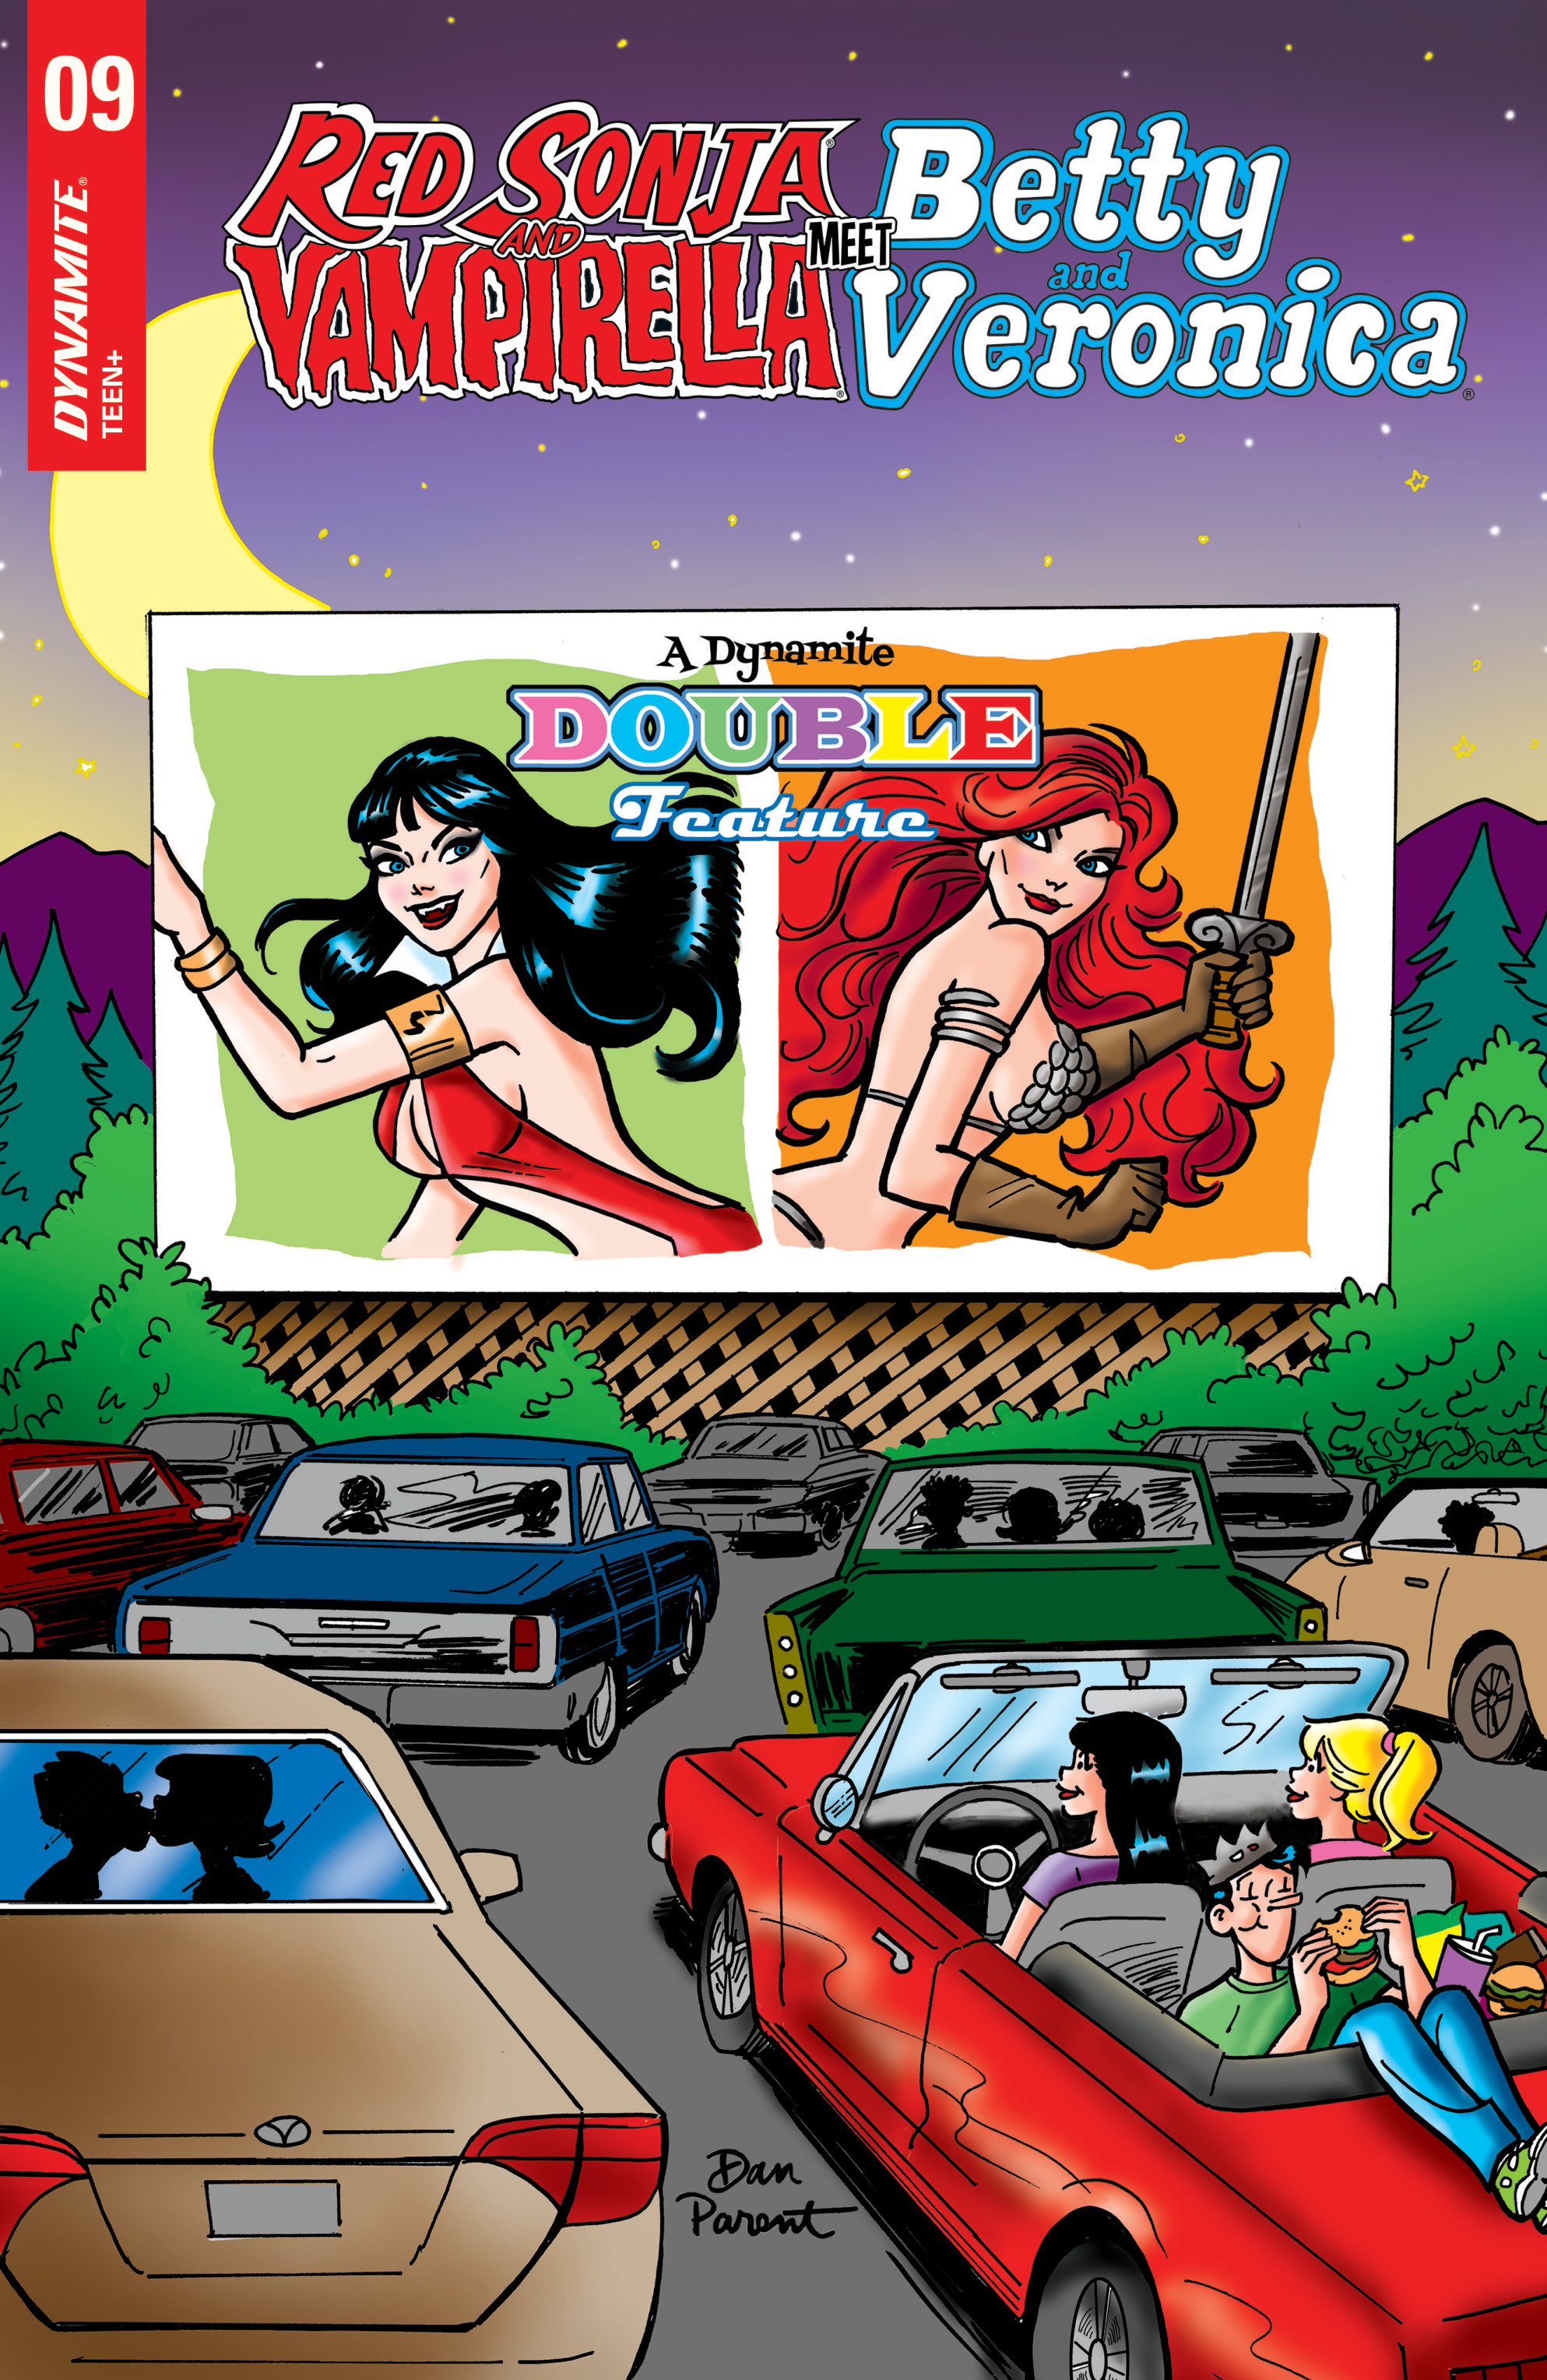 Read online Red Sonja and Vampirella Meet Betty and Veronica comic -  Issue #9 - 4